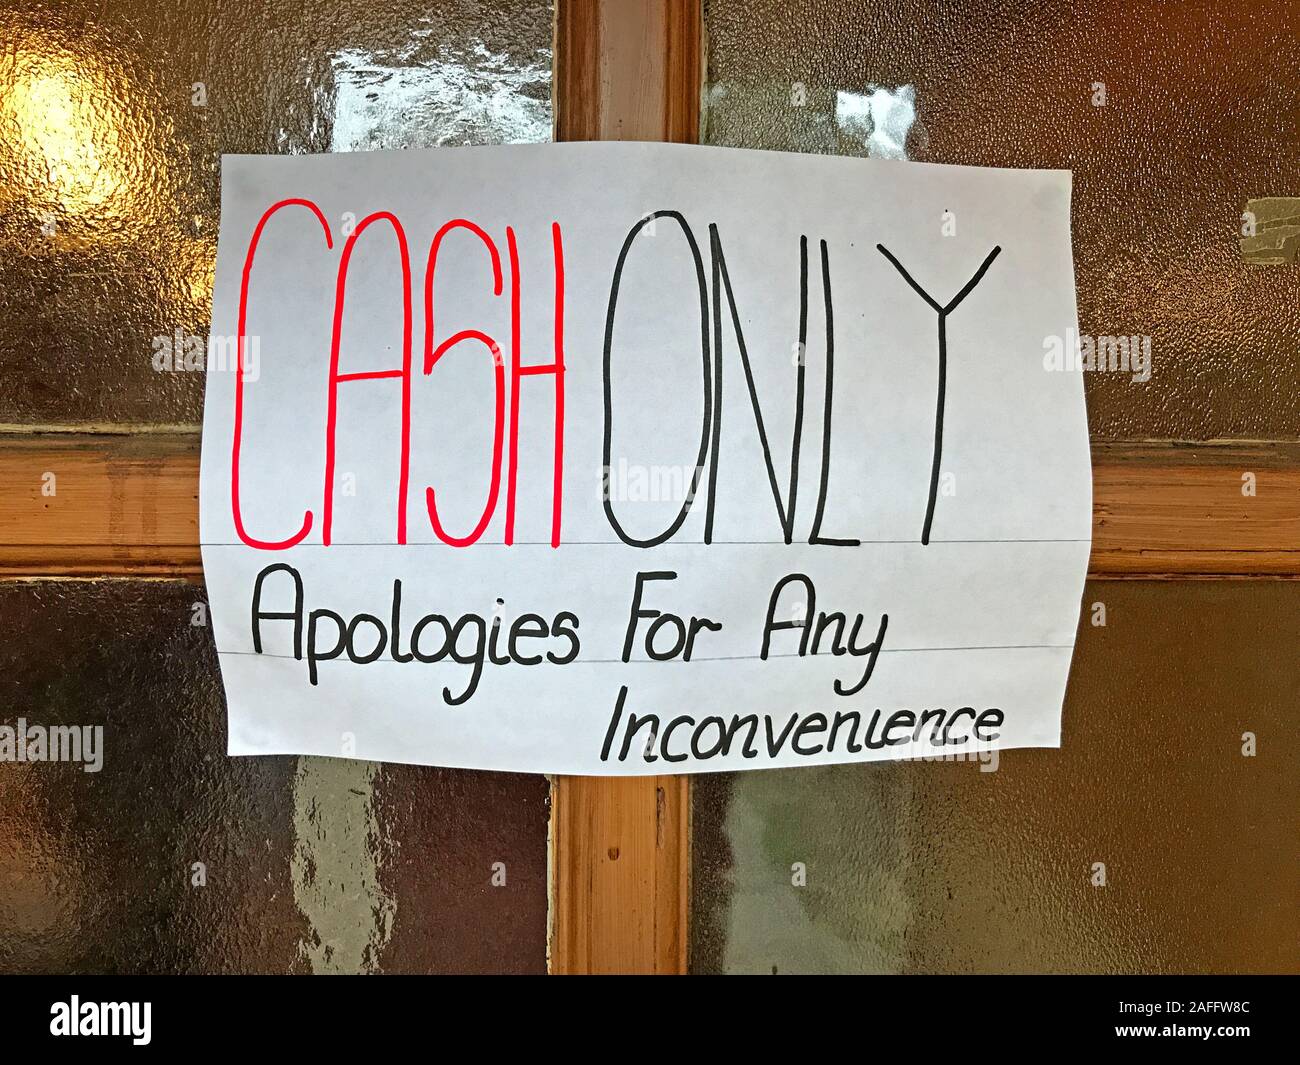 Cash Only,Sorry for any inconvenience,sign,at Vine Inn,Dunham Massey,Samuel Smiths pub,Cheshire,England,UK Stock Photo